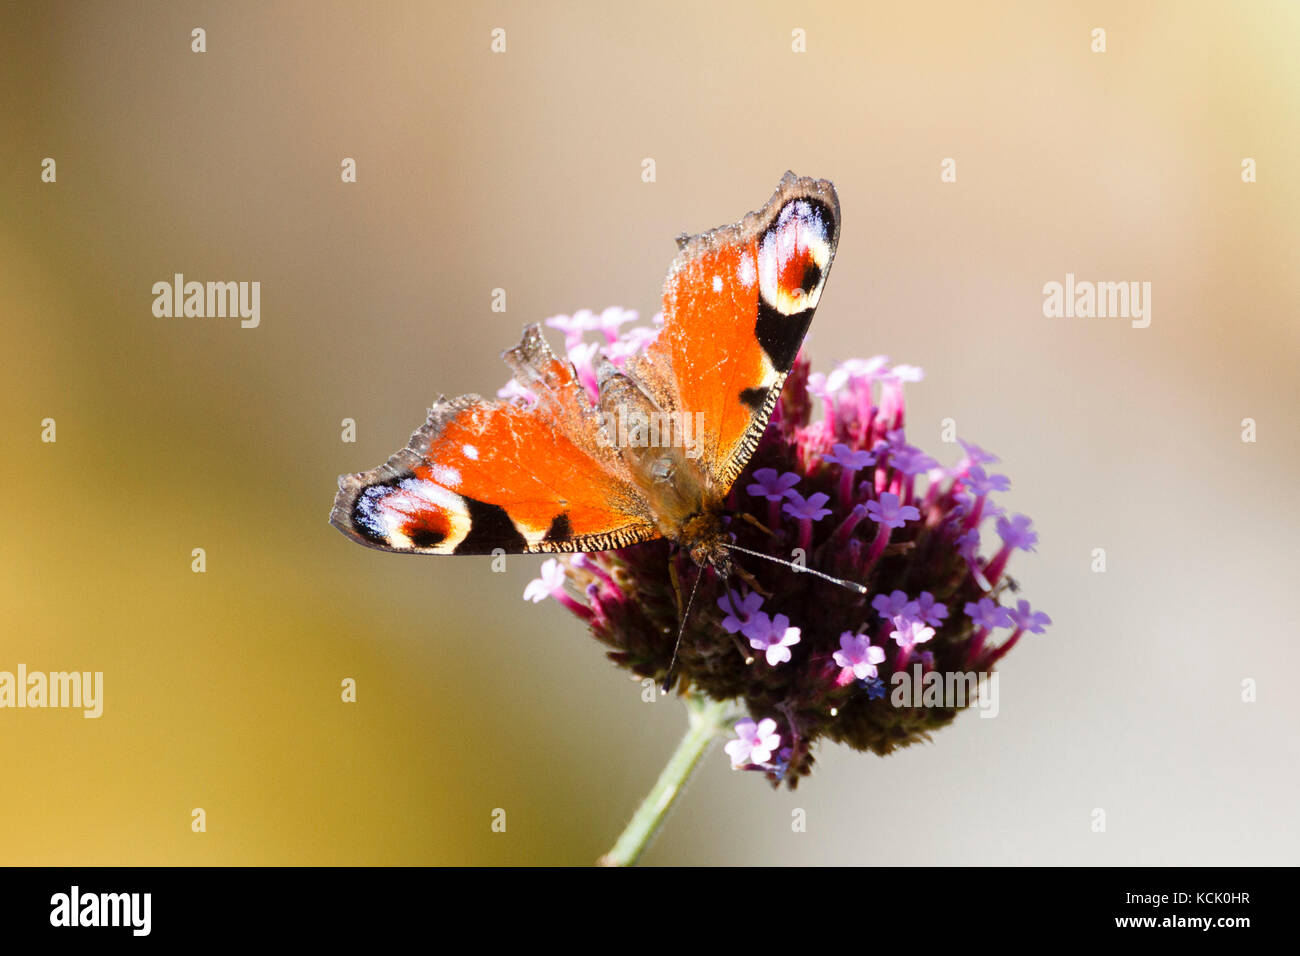 6th Oct 2017. UK weather. A Peacock butterfly (Aglais io) feasts on a Verbena plant in the morning sun in East Sussex, UK Credit: Ed Brown/Alamy Live News Stock Photo